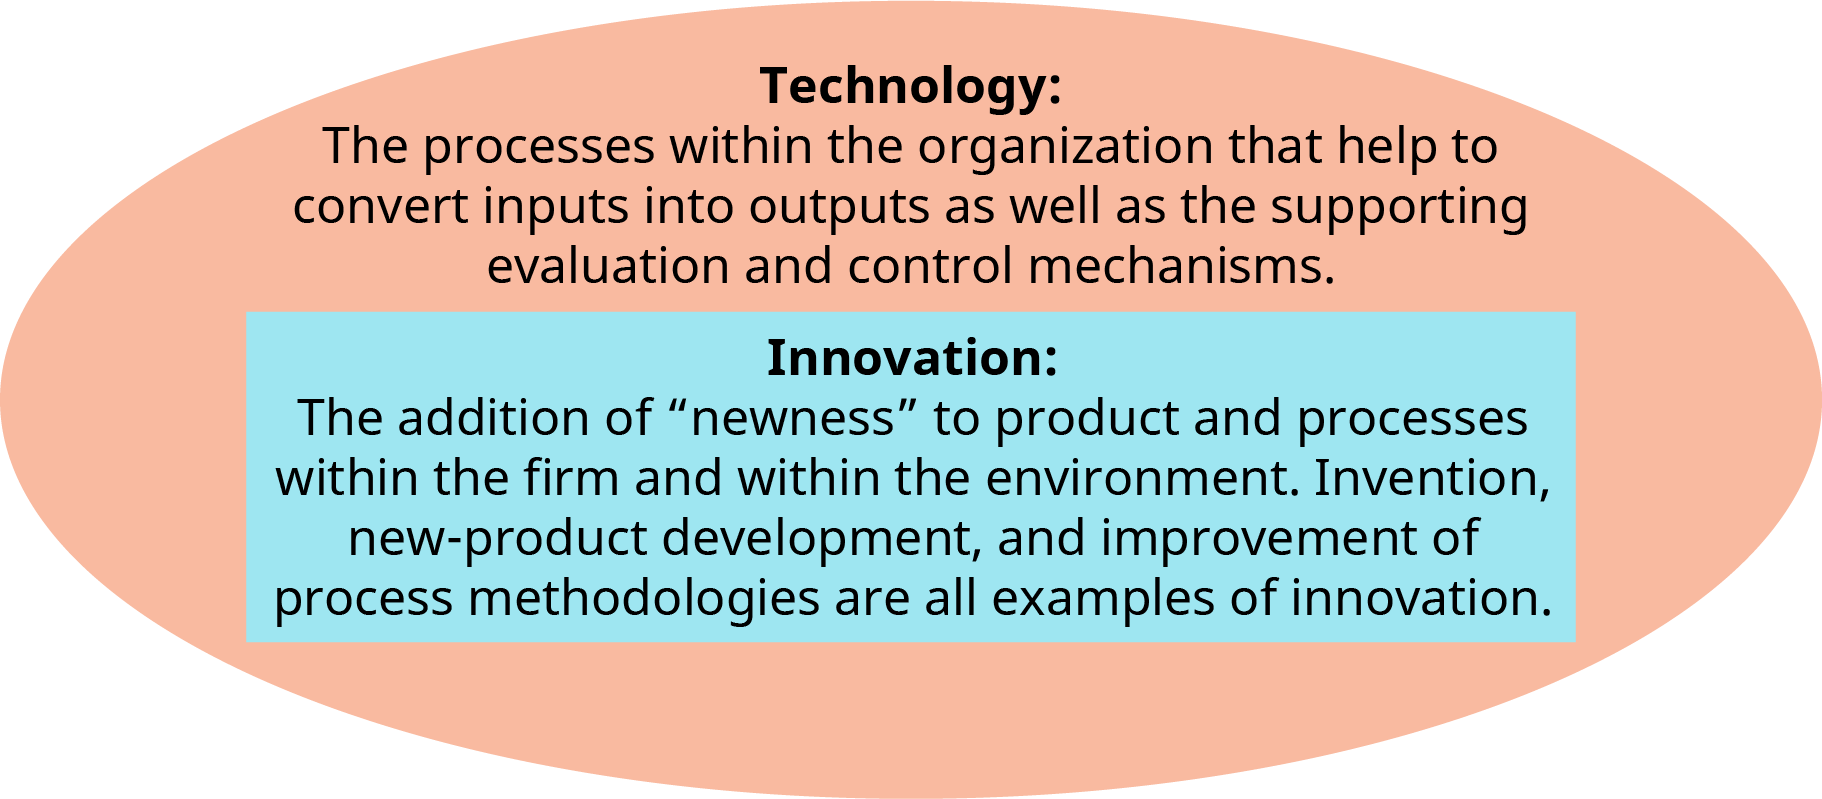 An illustration shows the definitions of the terms “Technology” and “Innovation” superimposed inside an oval.